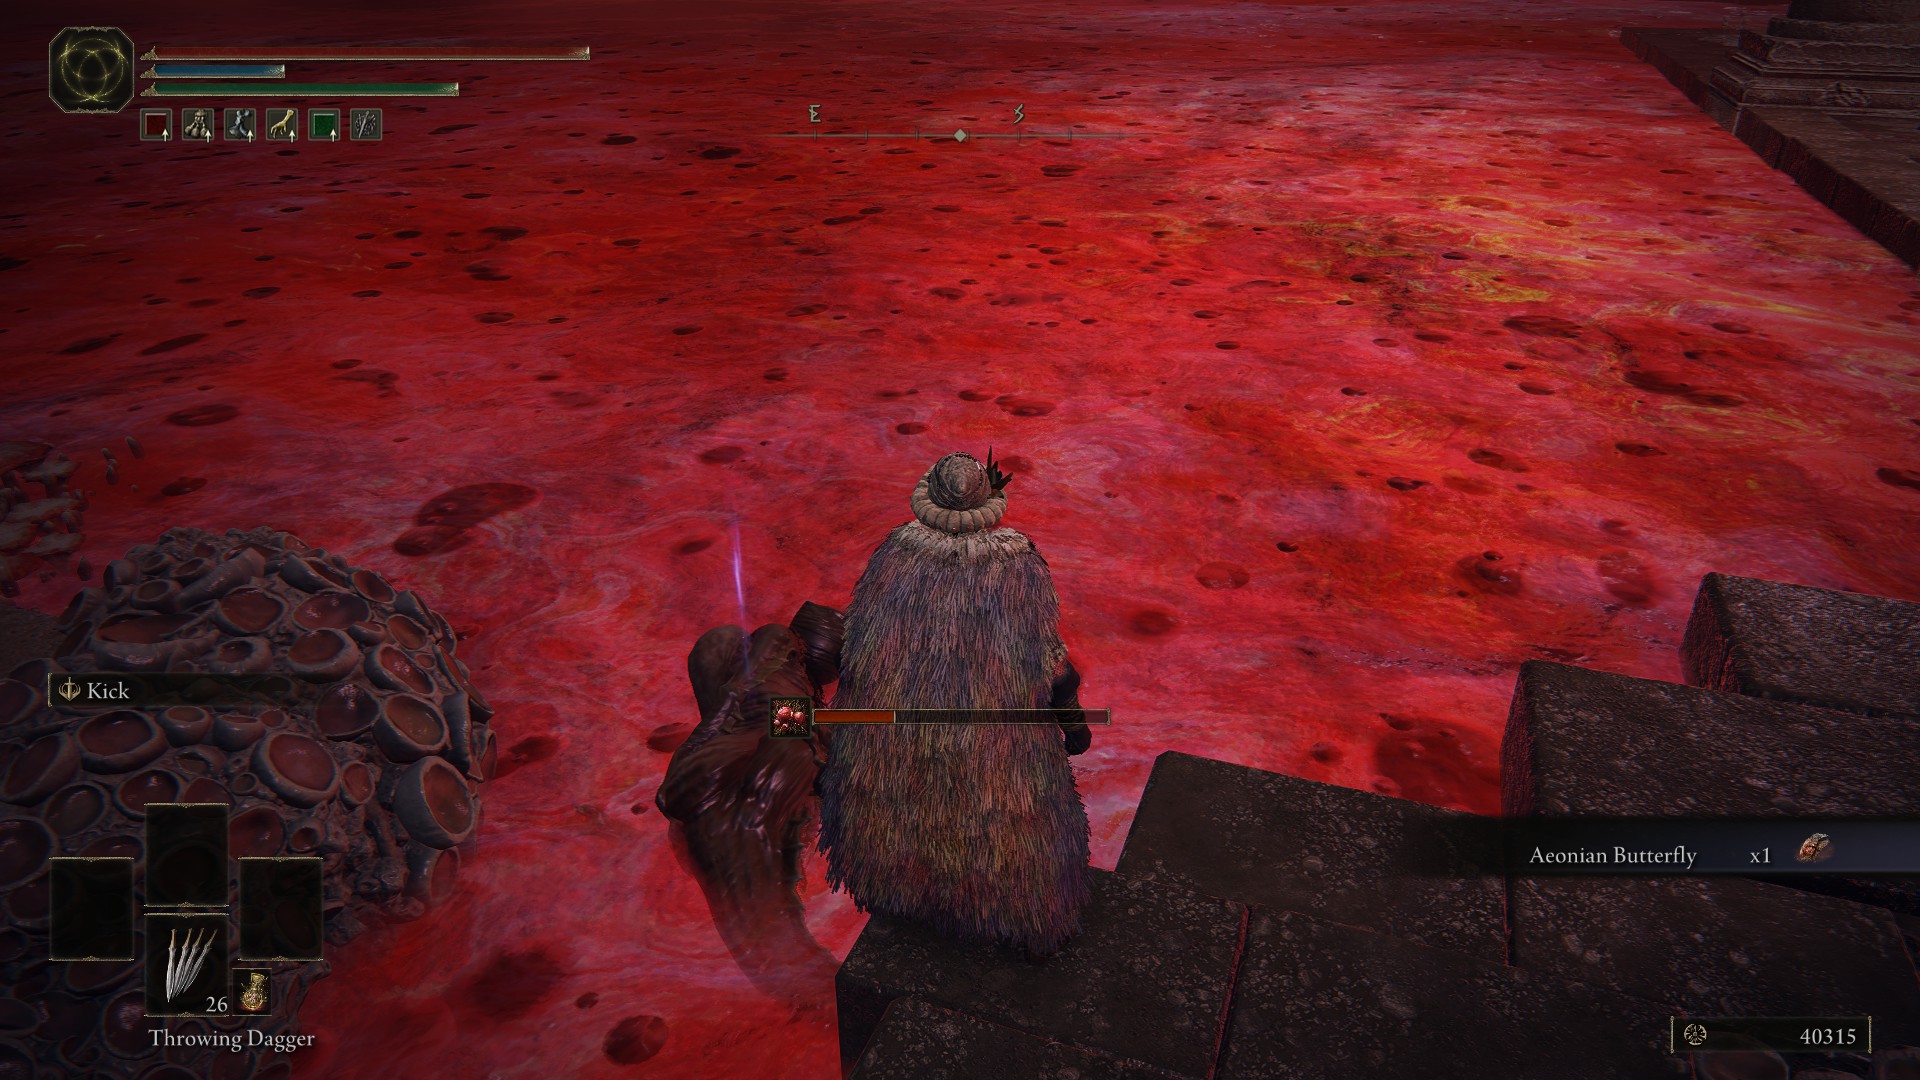 Screenshot from Elden Ring: a player character stands over a fresh basilisk corpse in the Lake of Rot, having pilfered a rare Aeonian Butterfly from it.